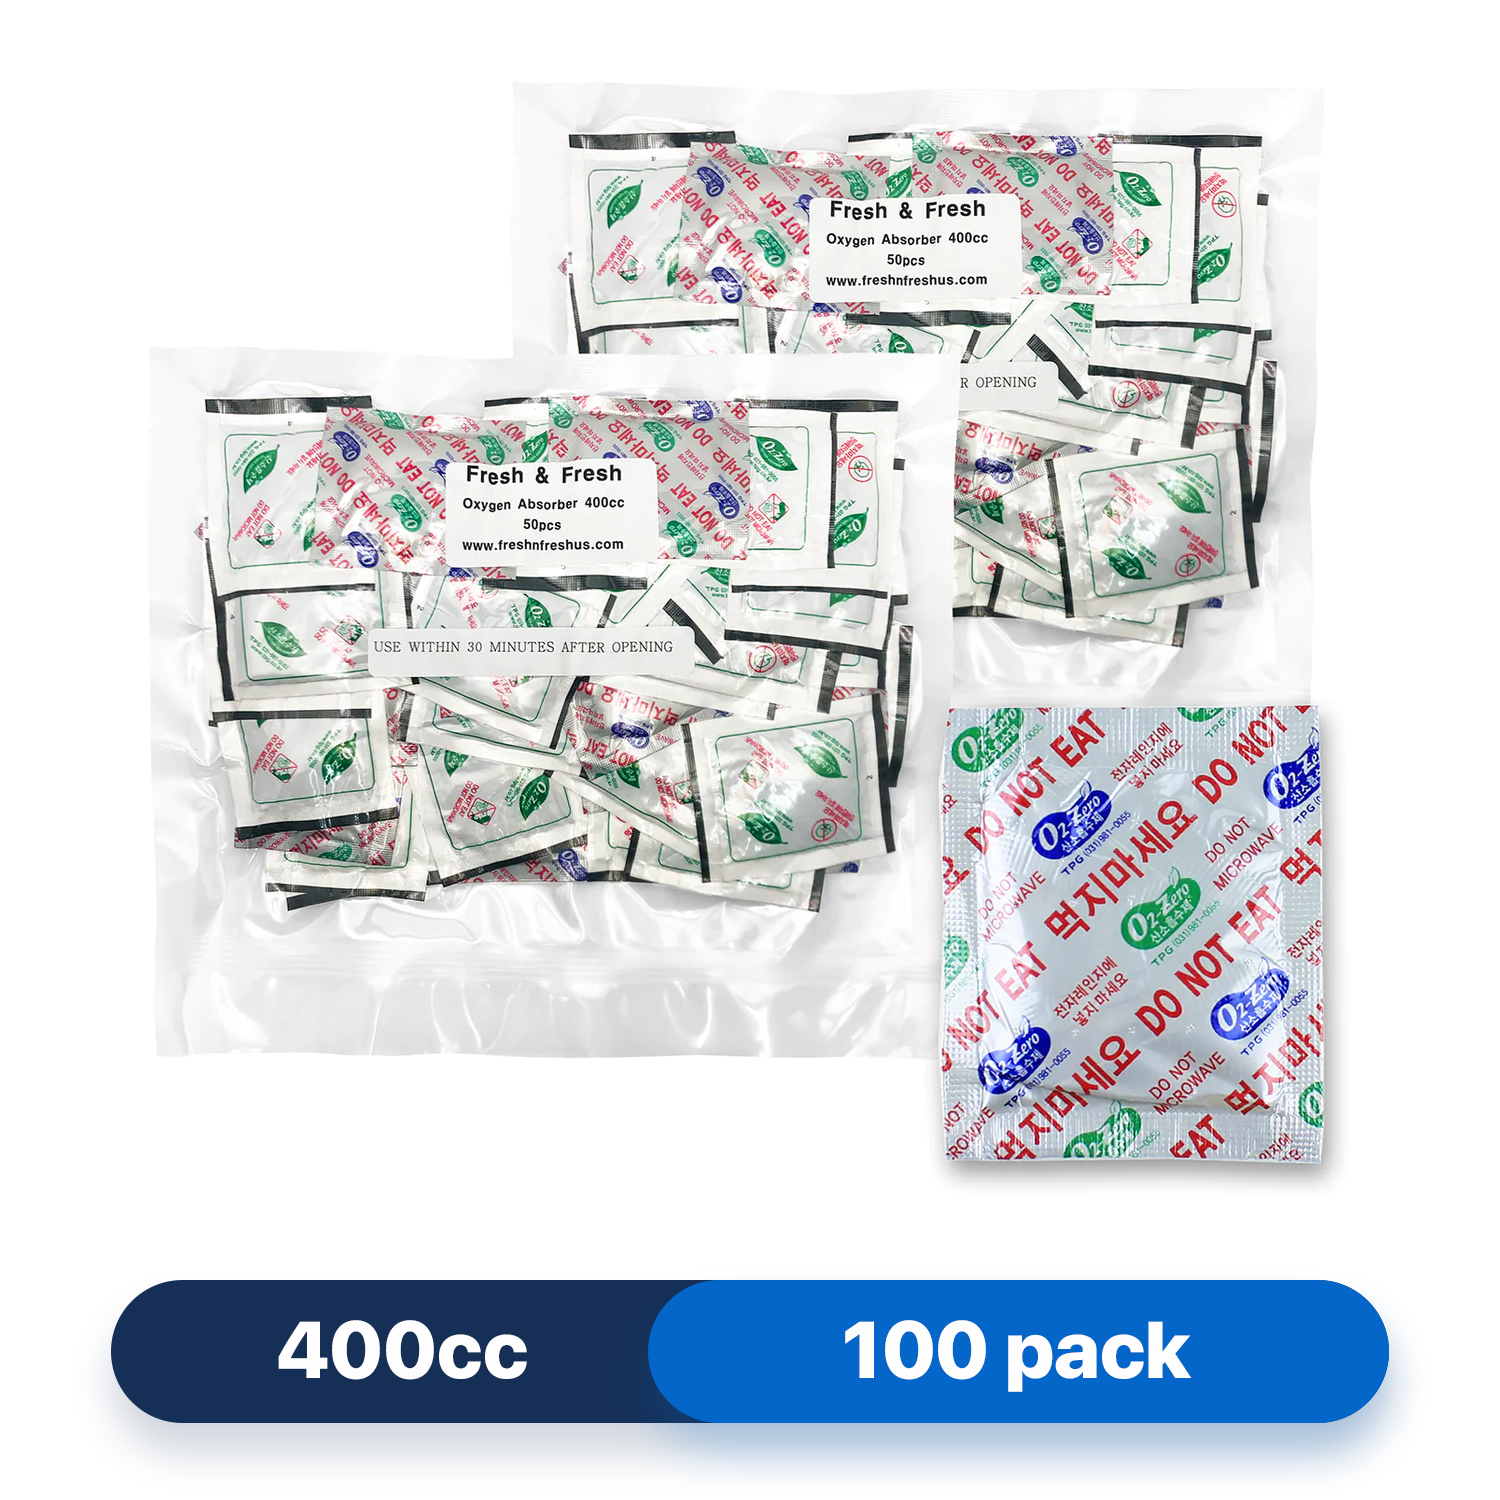 Fresh & Fresh (100 Packs) 400 CC Premium Oxygen Absorbers(2 Bag of 50 Packets) - ISO 9001 Certified Facility Manufactured